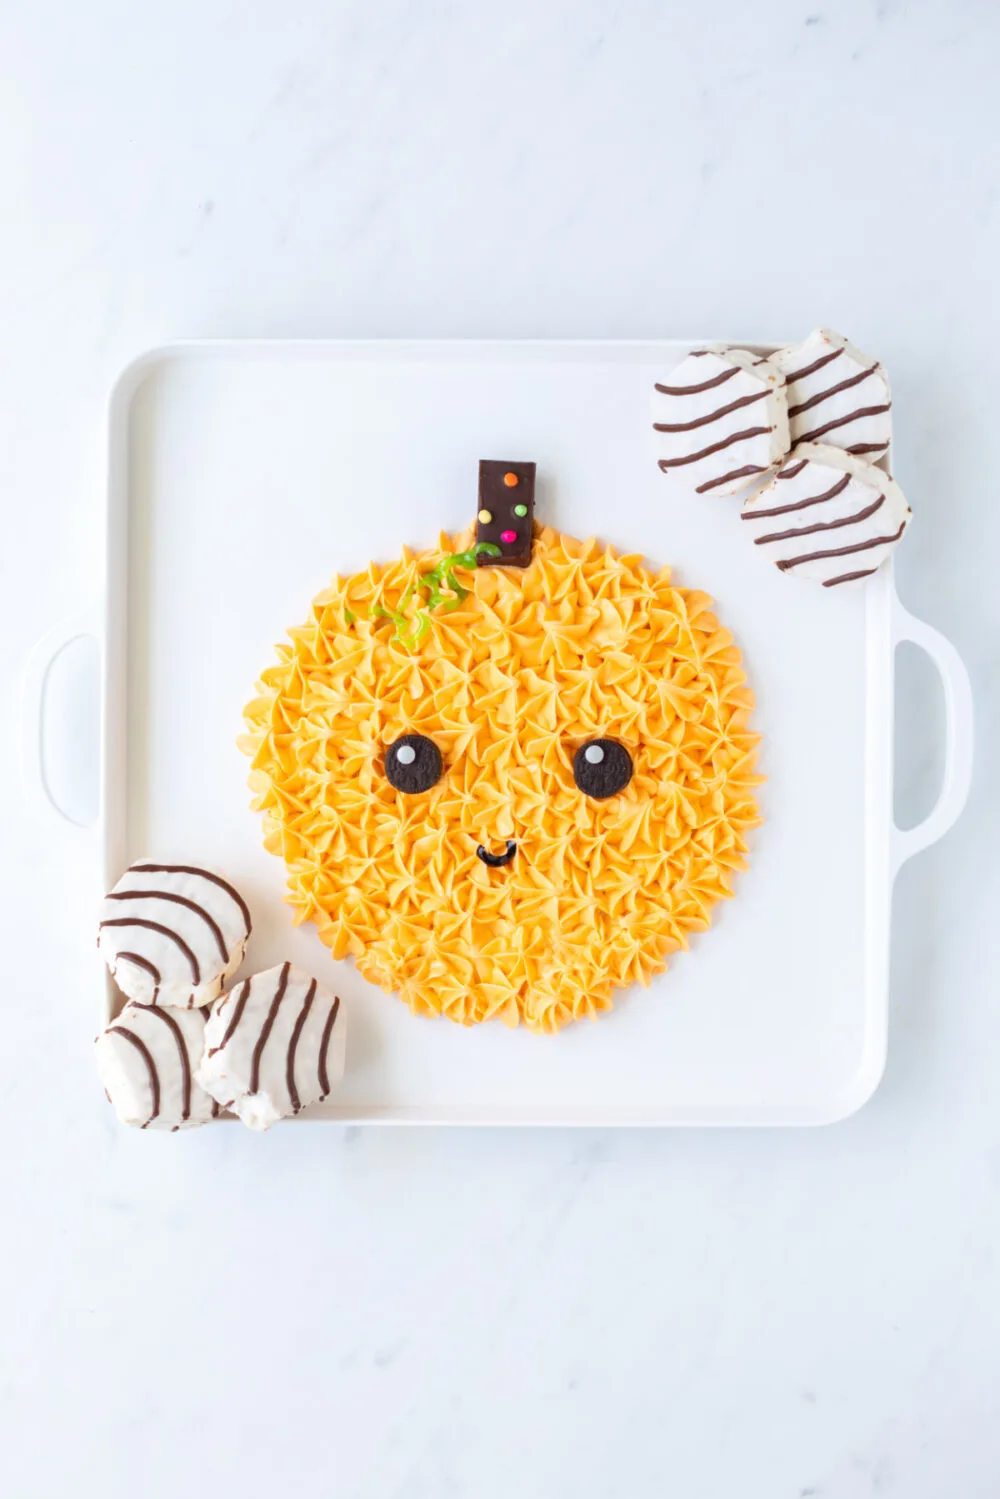 Cute smiling pumpkin made out of frosting on a board with Zebra cakes. 